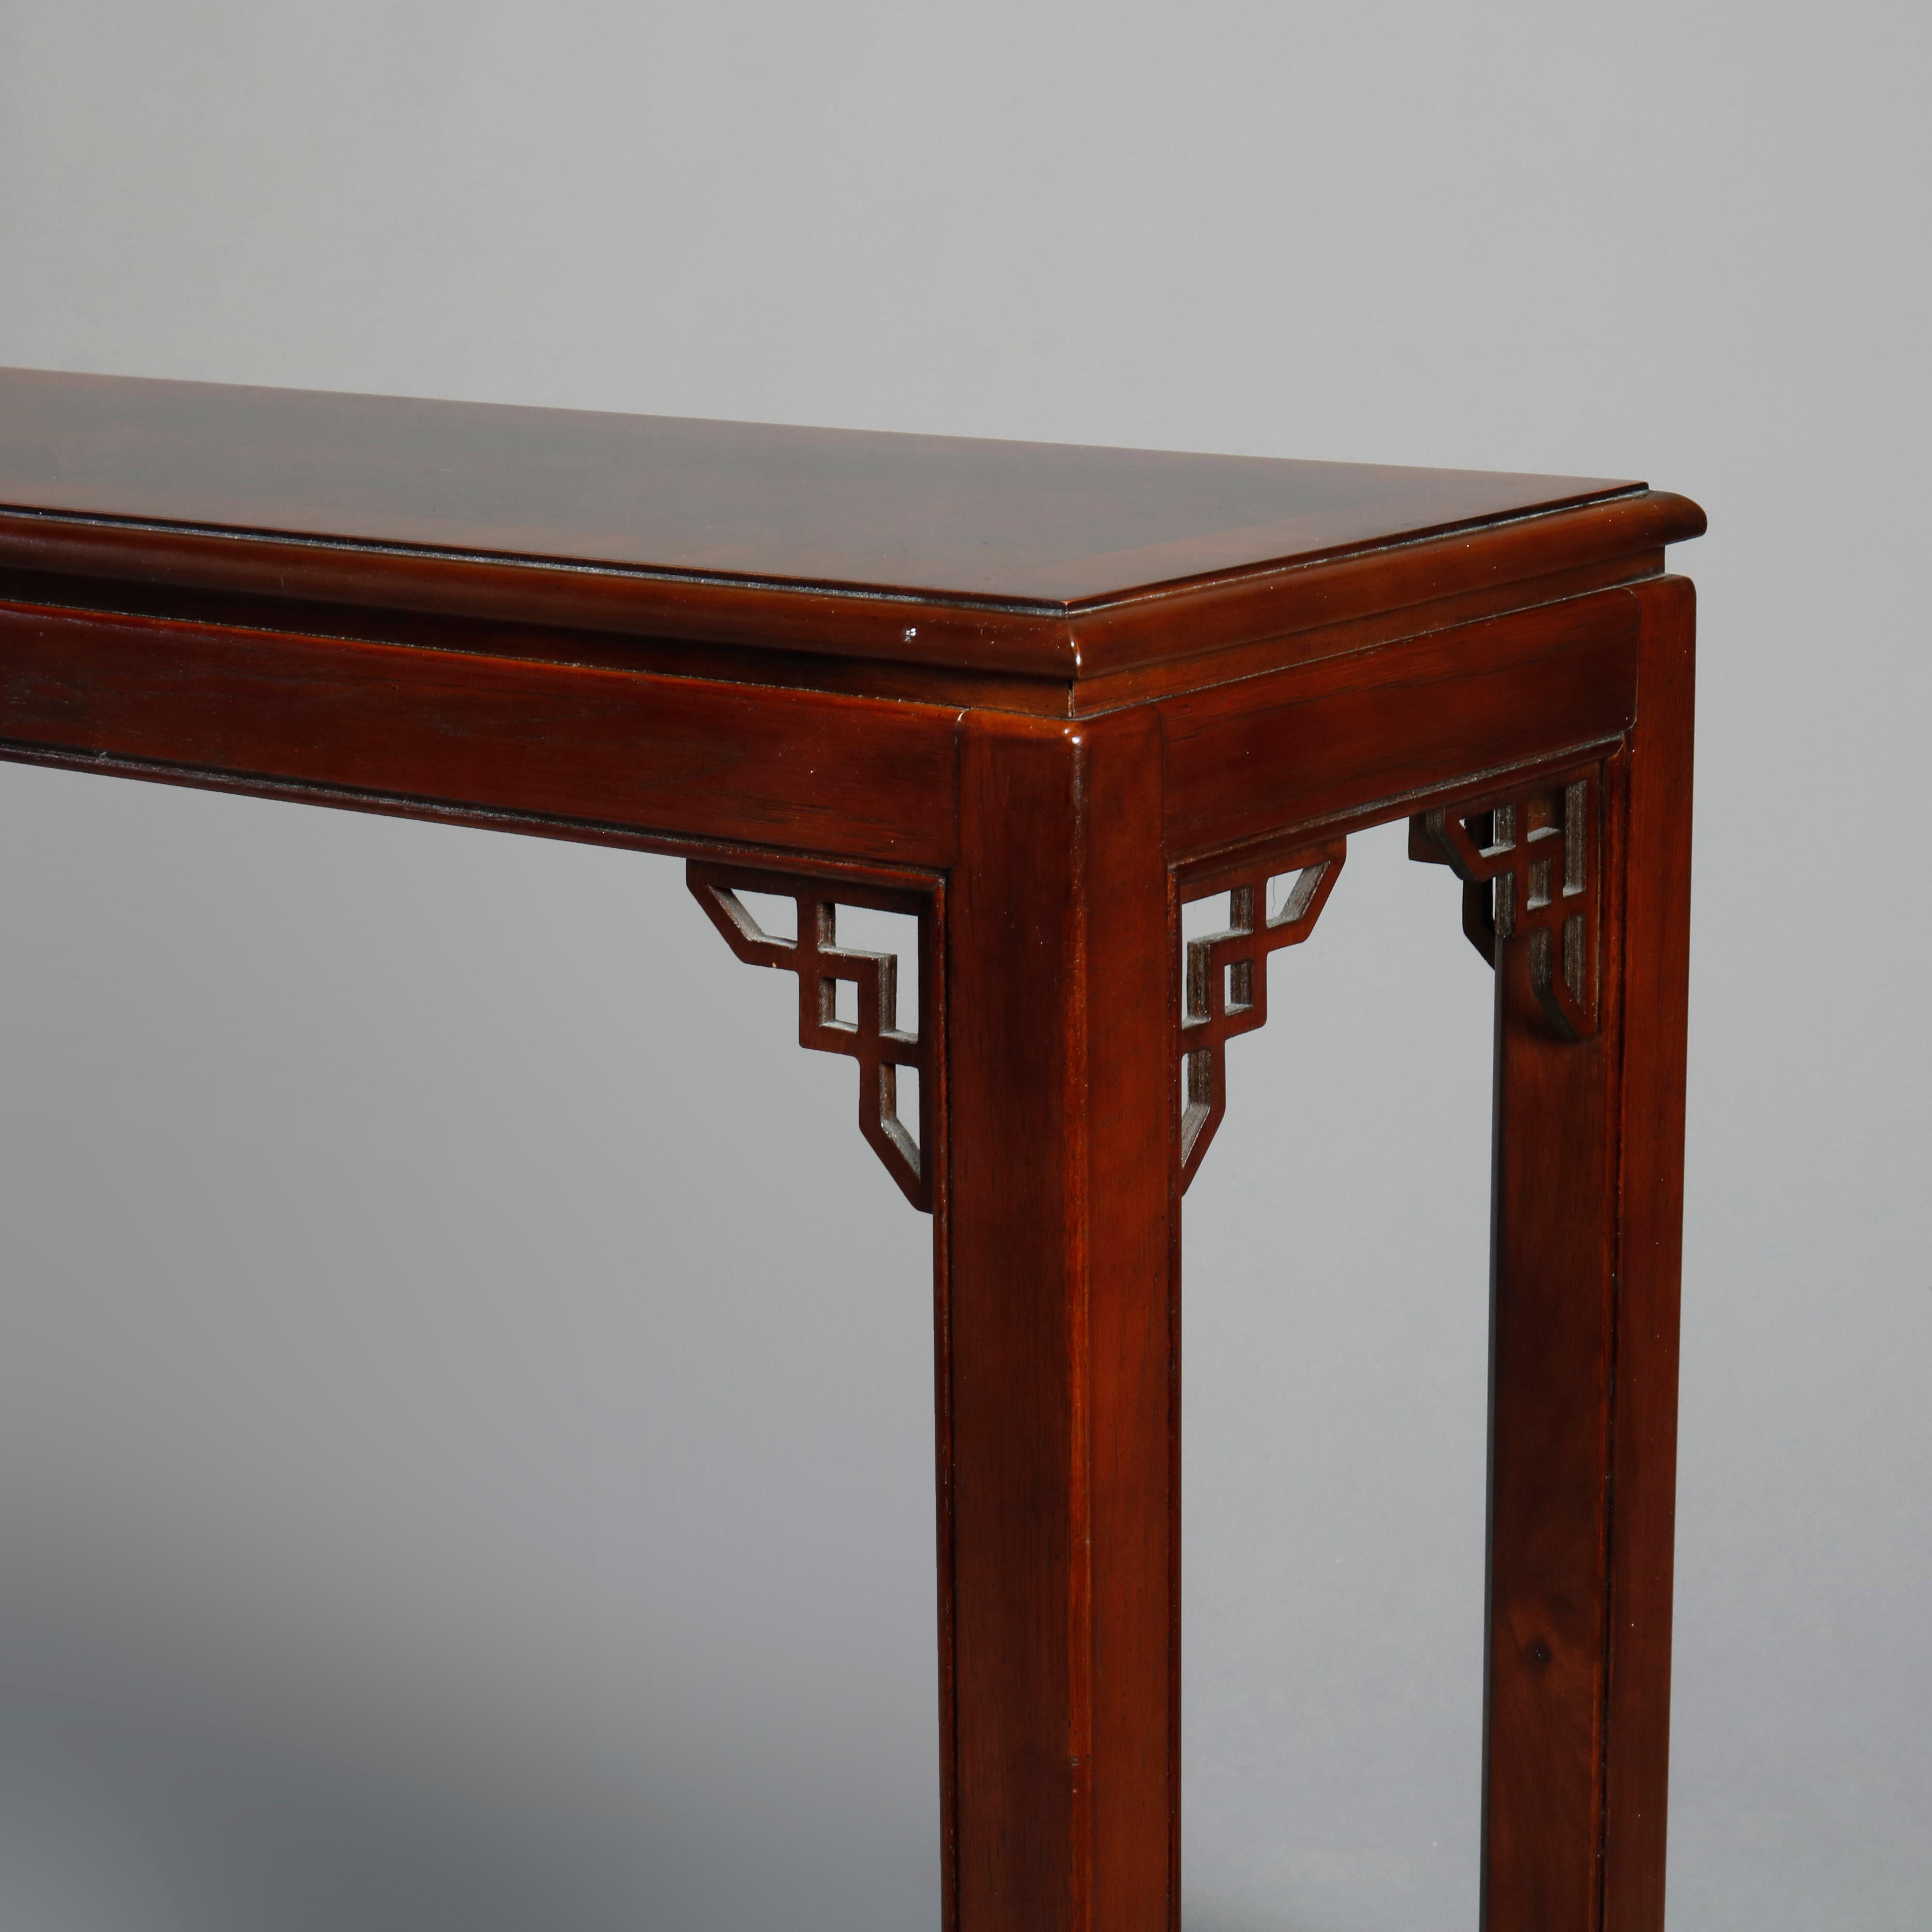 20th Century Antique Chinese Chippendale Mahogany Crossbanded Console Table by Drexel, 20th C